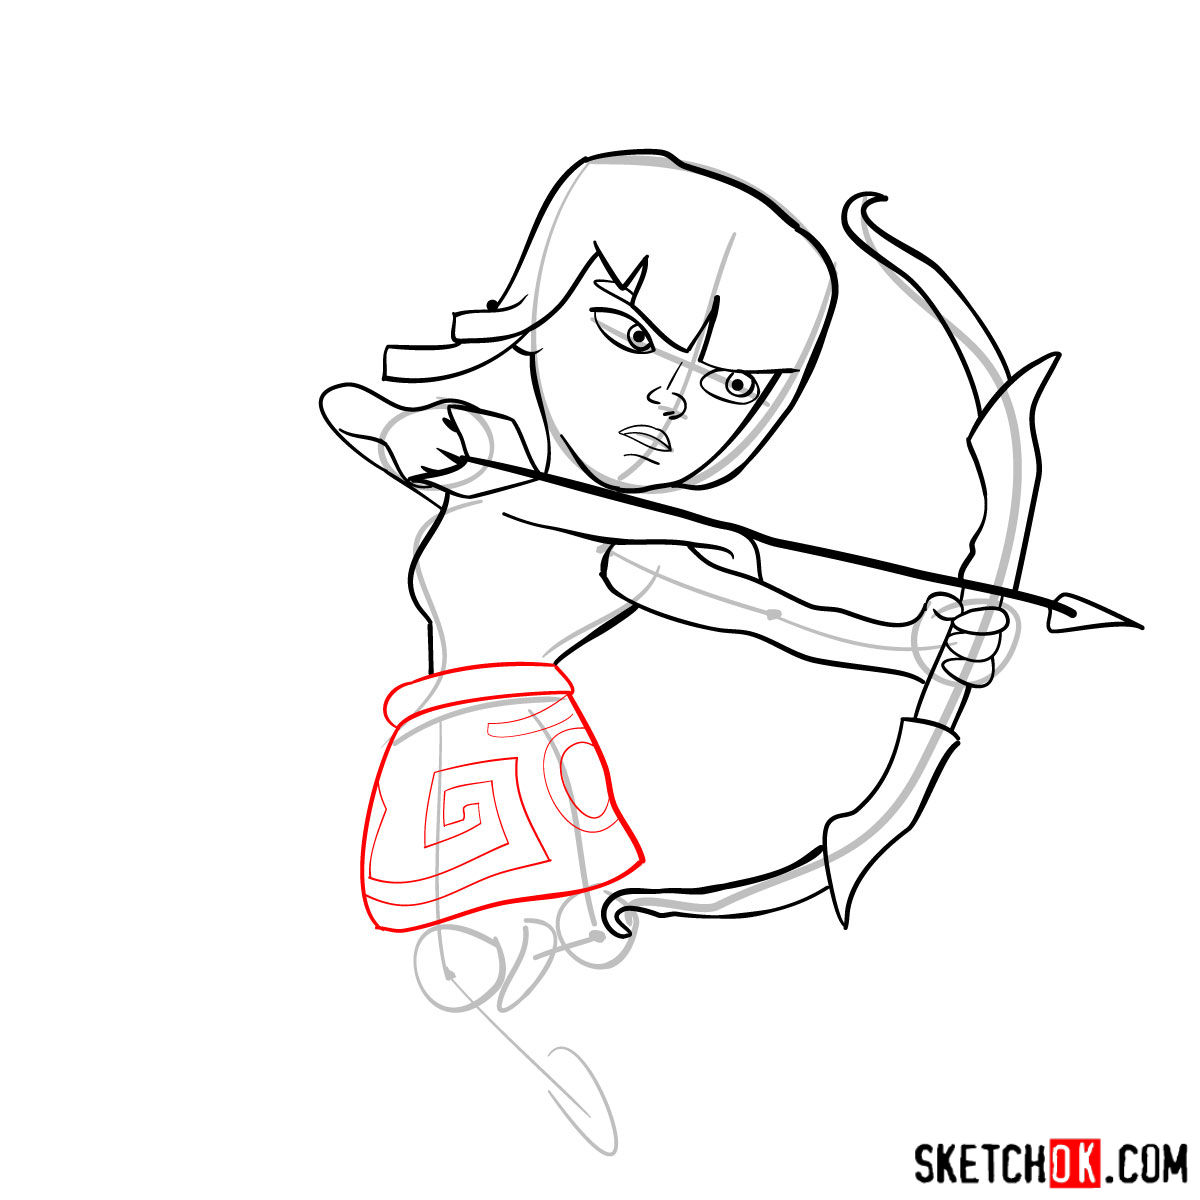 How to draw Archer from Clash of Clans - step 07